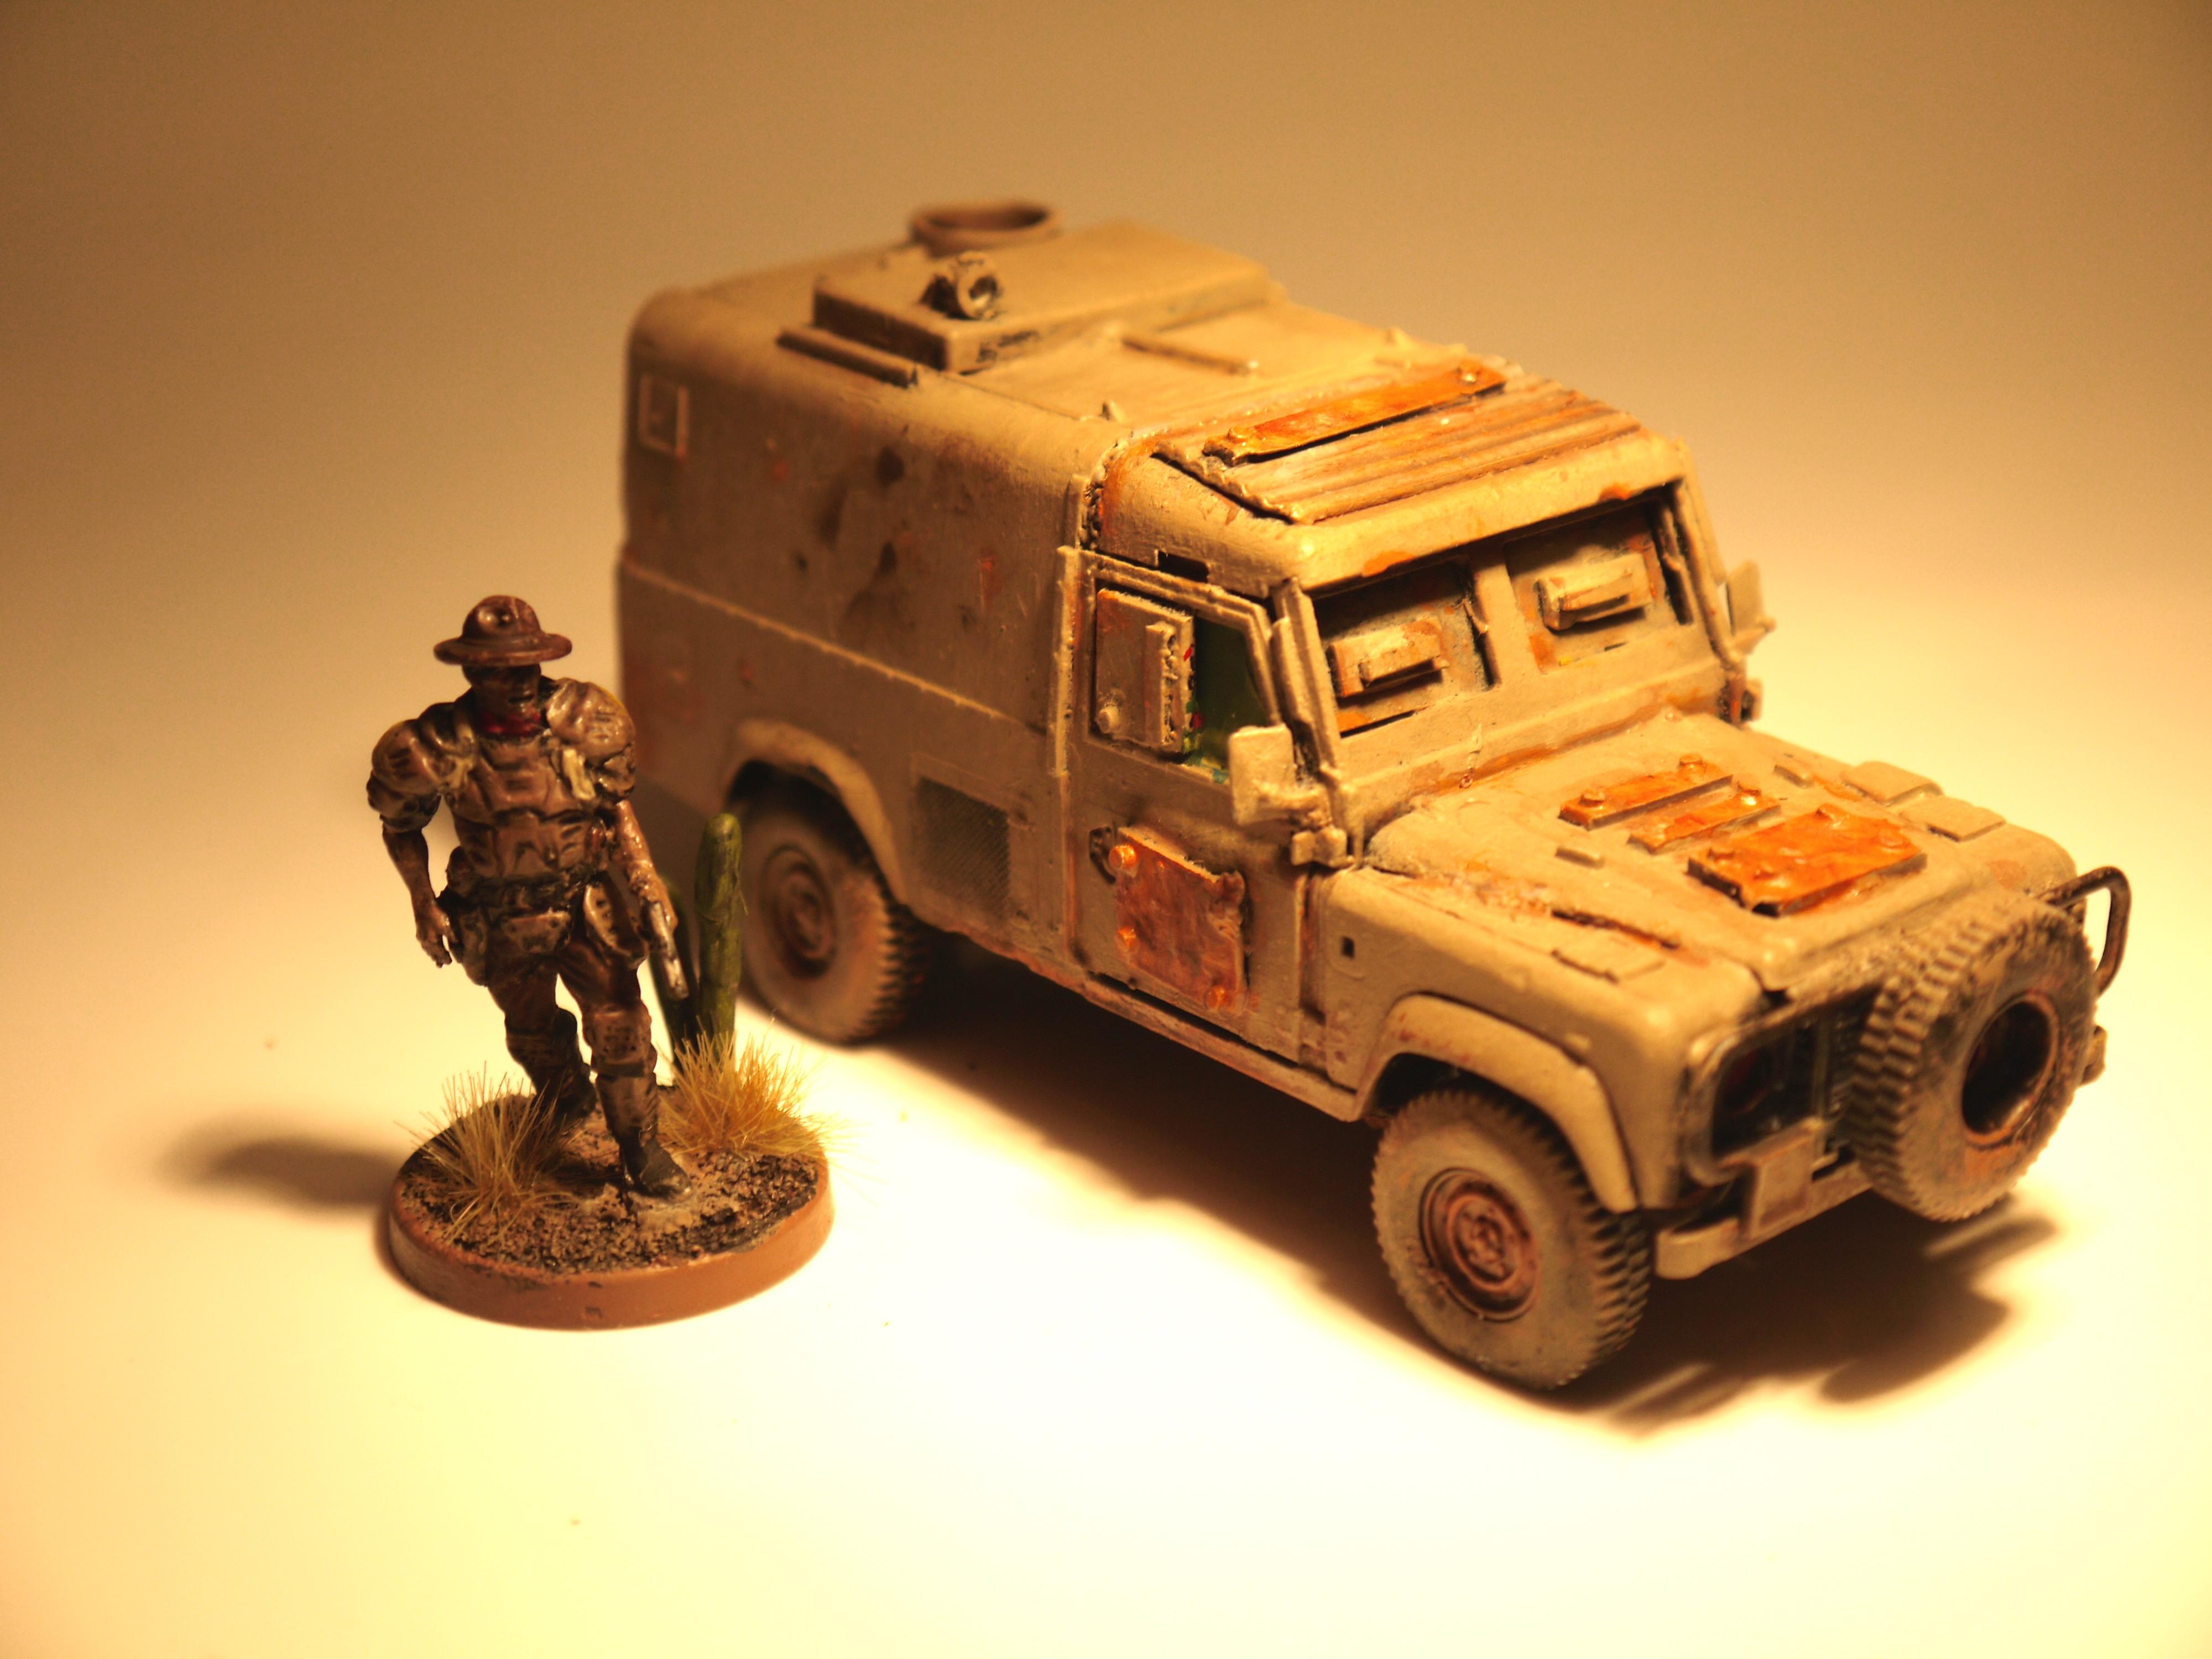 Army, British, Cars, Desert, Fallout, Fallout. Post Apocalyptic, Jeep, Landrover, Post Apocalyptic, Post-apocalyptic, Rangers